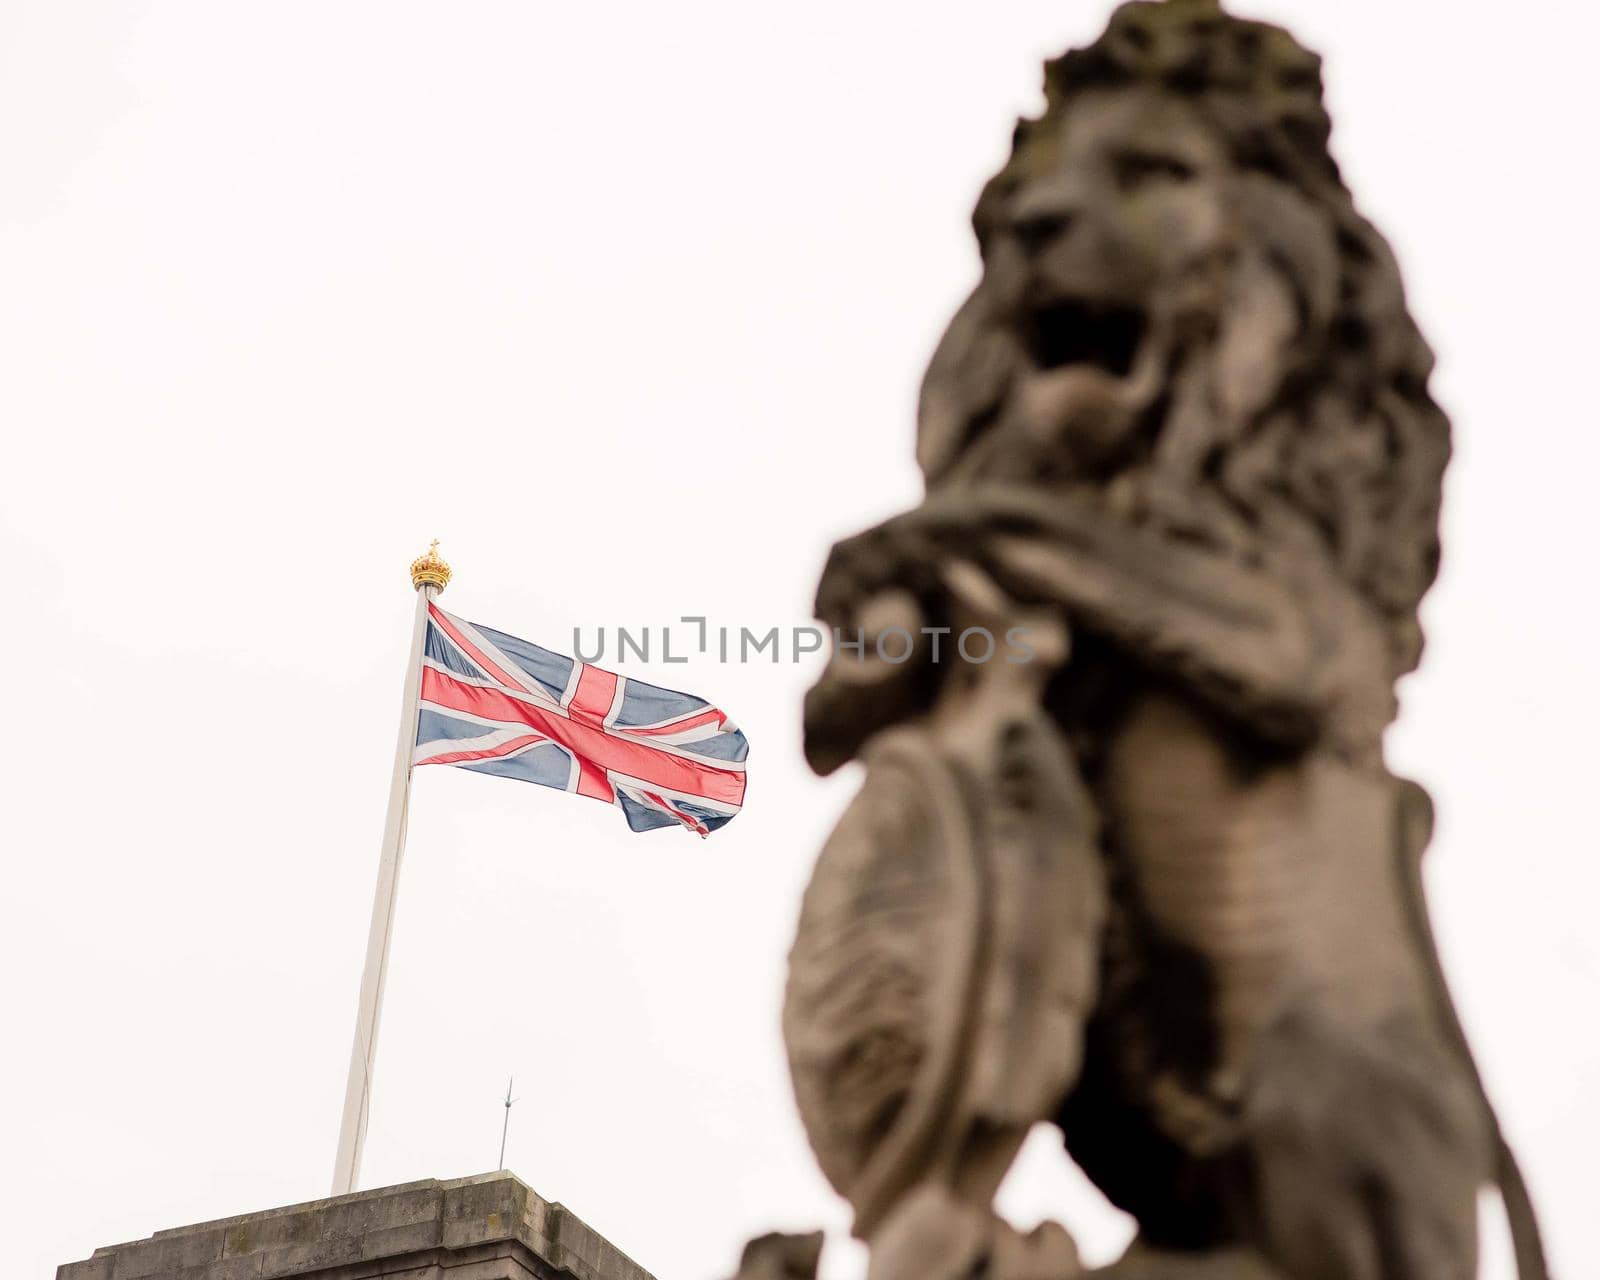 London, UK - January 29, 2017: A detail photo of the Victoria Memorial including a unicorn and lion statue outside of Buckingham Palace in London.